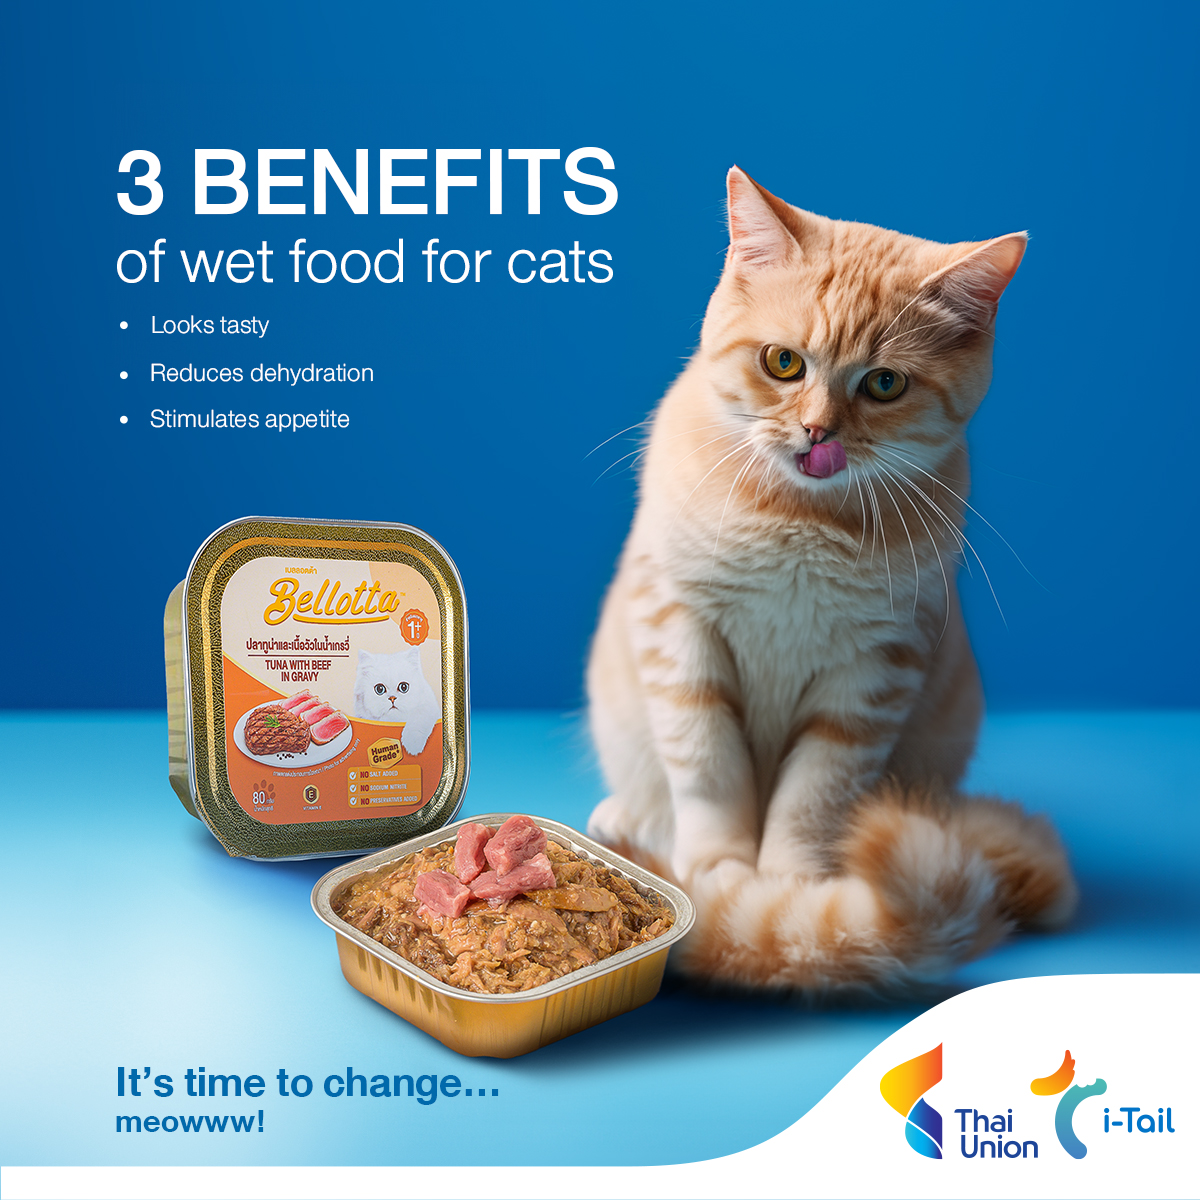 Thai Union believes that pets are family members. For that reason, we have selected ingredients with extra care for our furry friends to ensure they are eating the highest quality and best tasting wet food. #ThaiUnion #HealthyLivingHealthyOceans #iTail #Bellotta